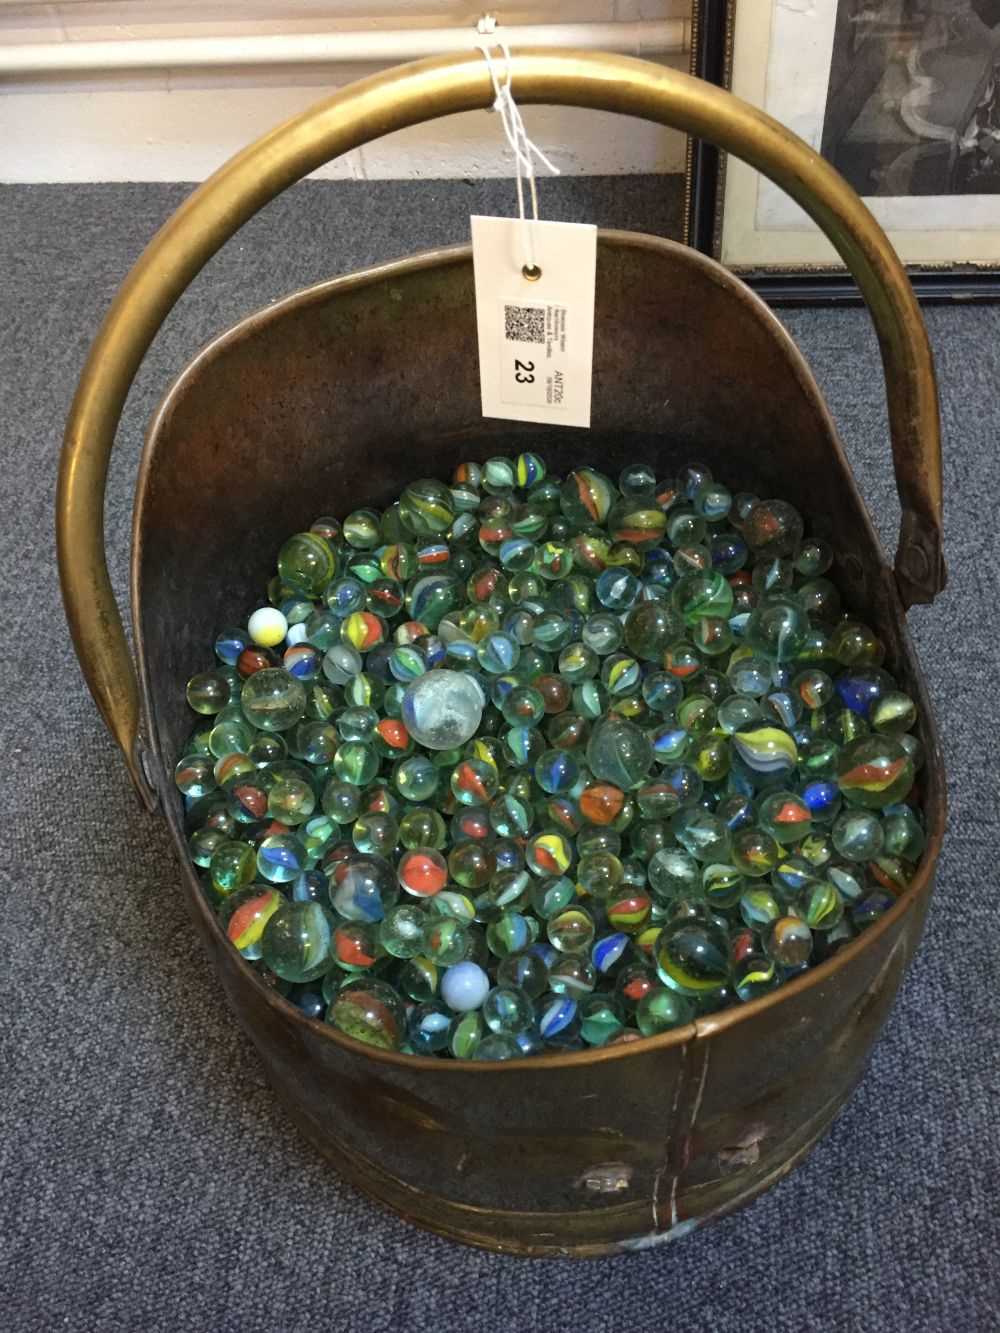 Lot 23 - Marbles. An extensive collection of 20th century glass marbles